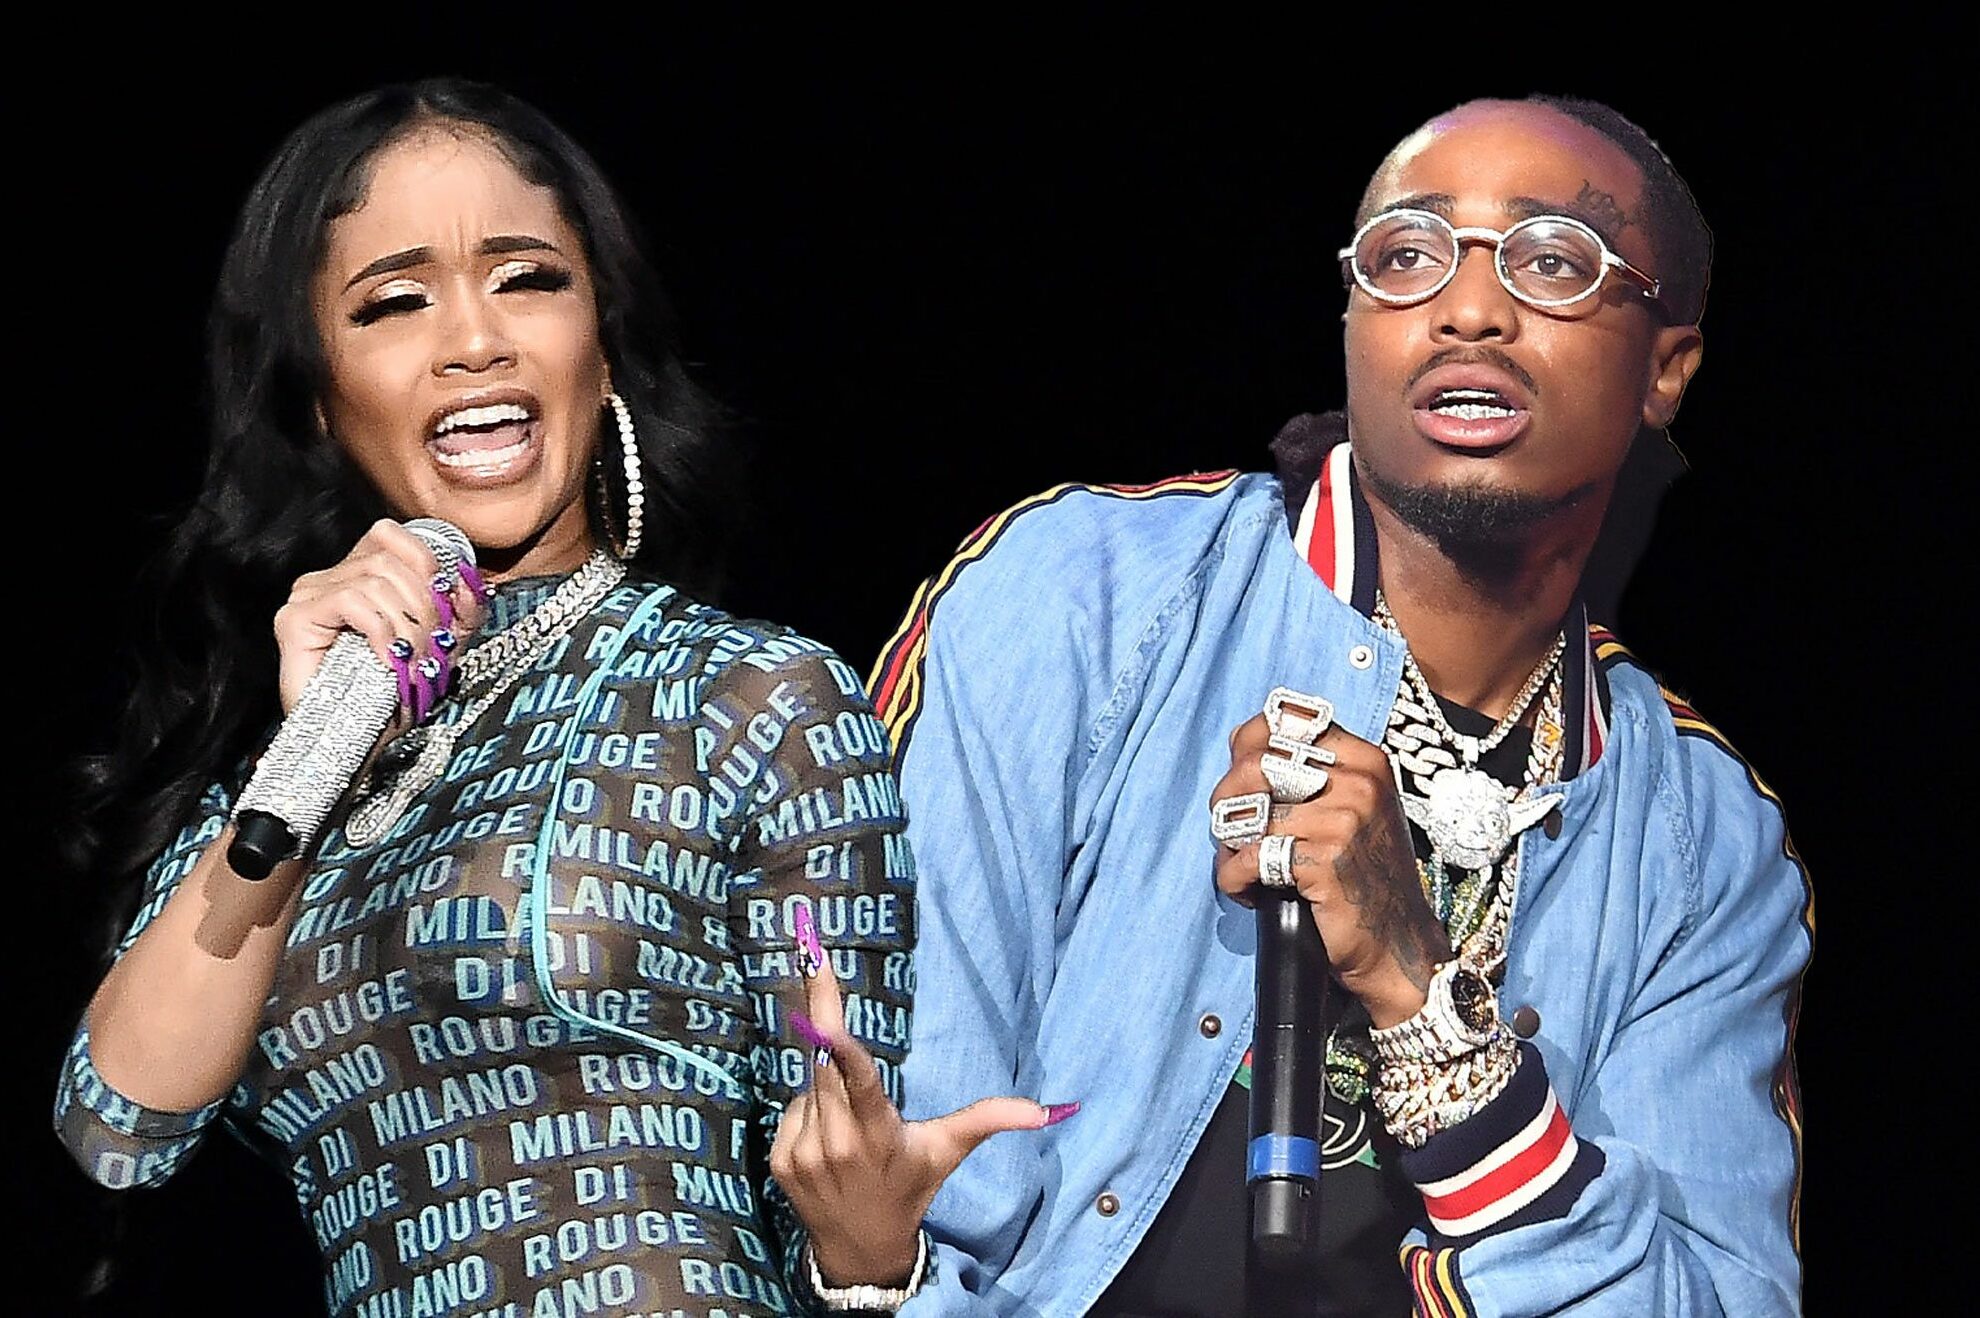 Video of Quavo and Saweetie fighting in elevator stirs social media arguments Introduction [Daily trending video intro soundbite] [Video of Quavo and Saweetie] [Video of Quavo and Saweetie] [Image of tweets] [Image of tweets] [Image of tweets] [Image of Quavo and Saweetie] [Image of Quavo and Saweetie] [Image of Quavo and Saweetie] [Daily trending video outro script]